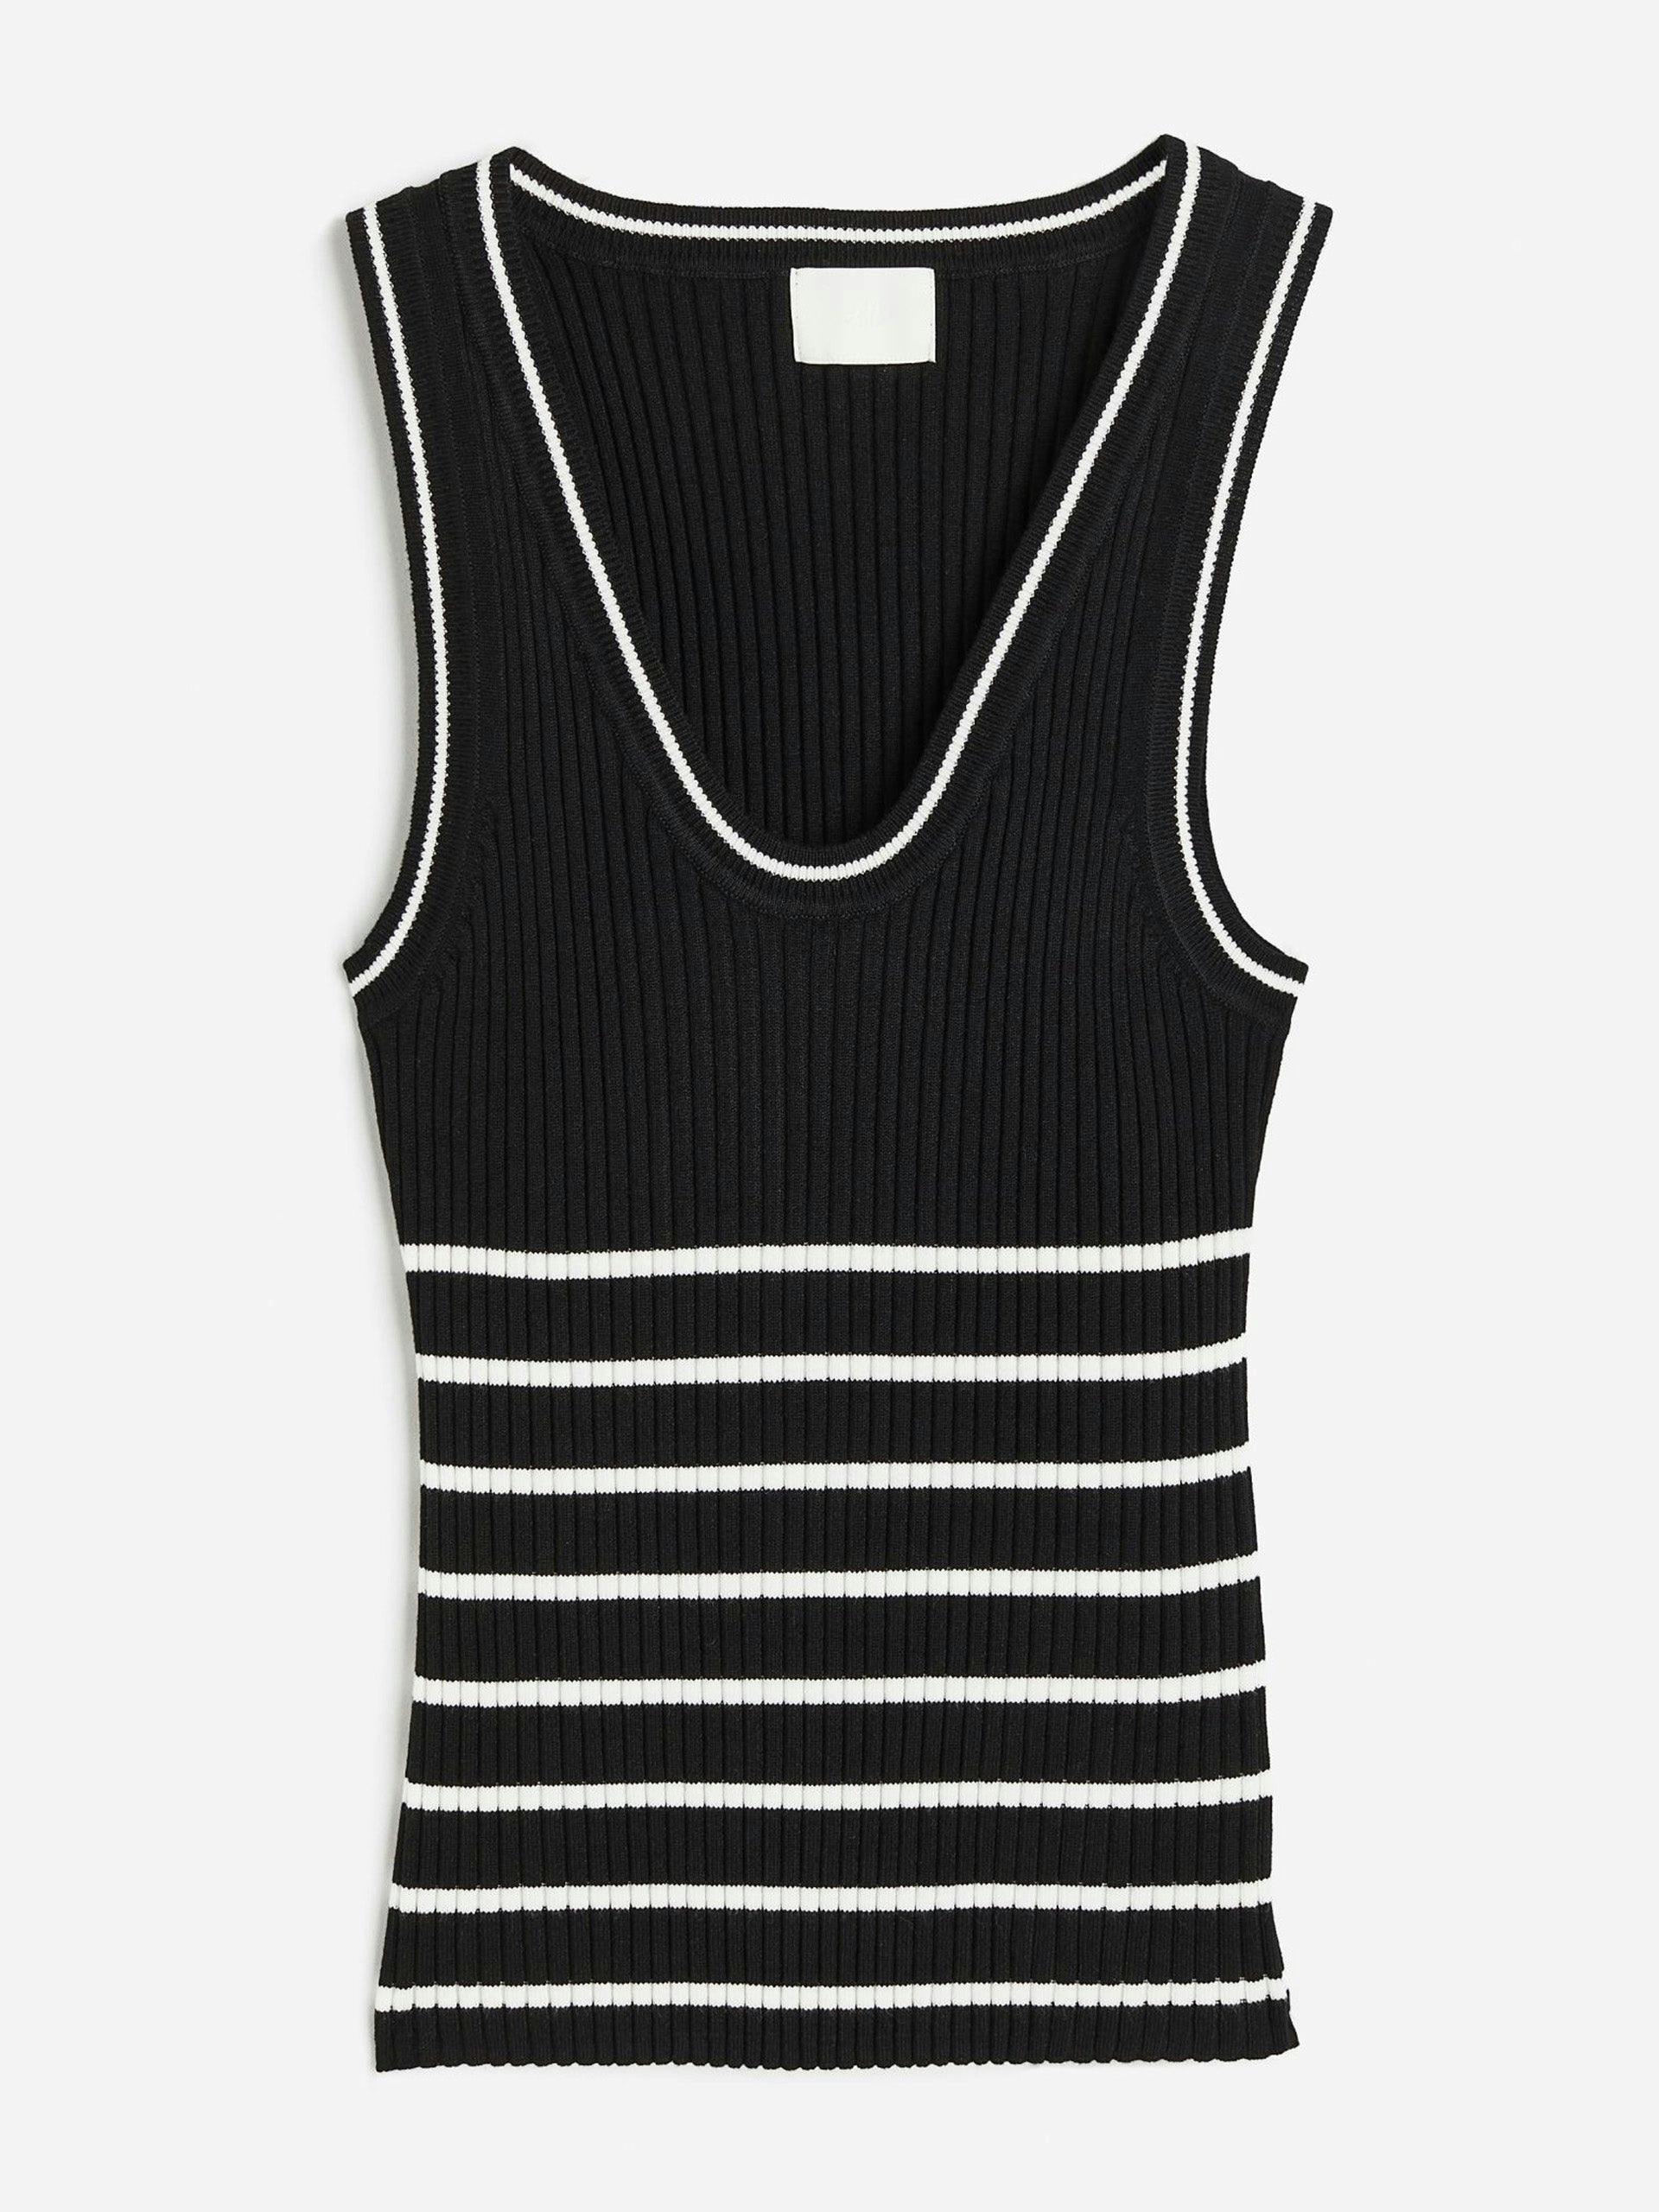 Black and white rib knitted vest top